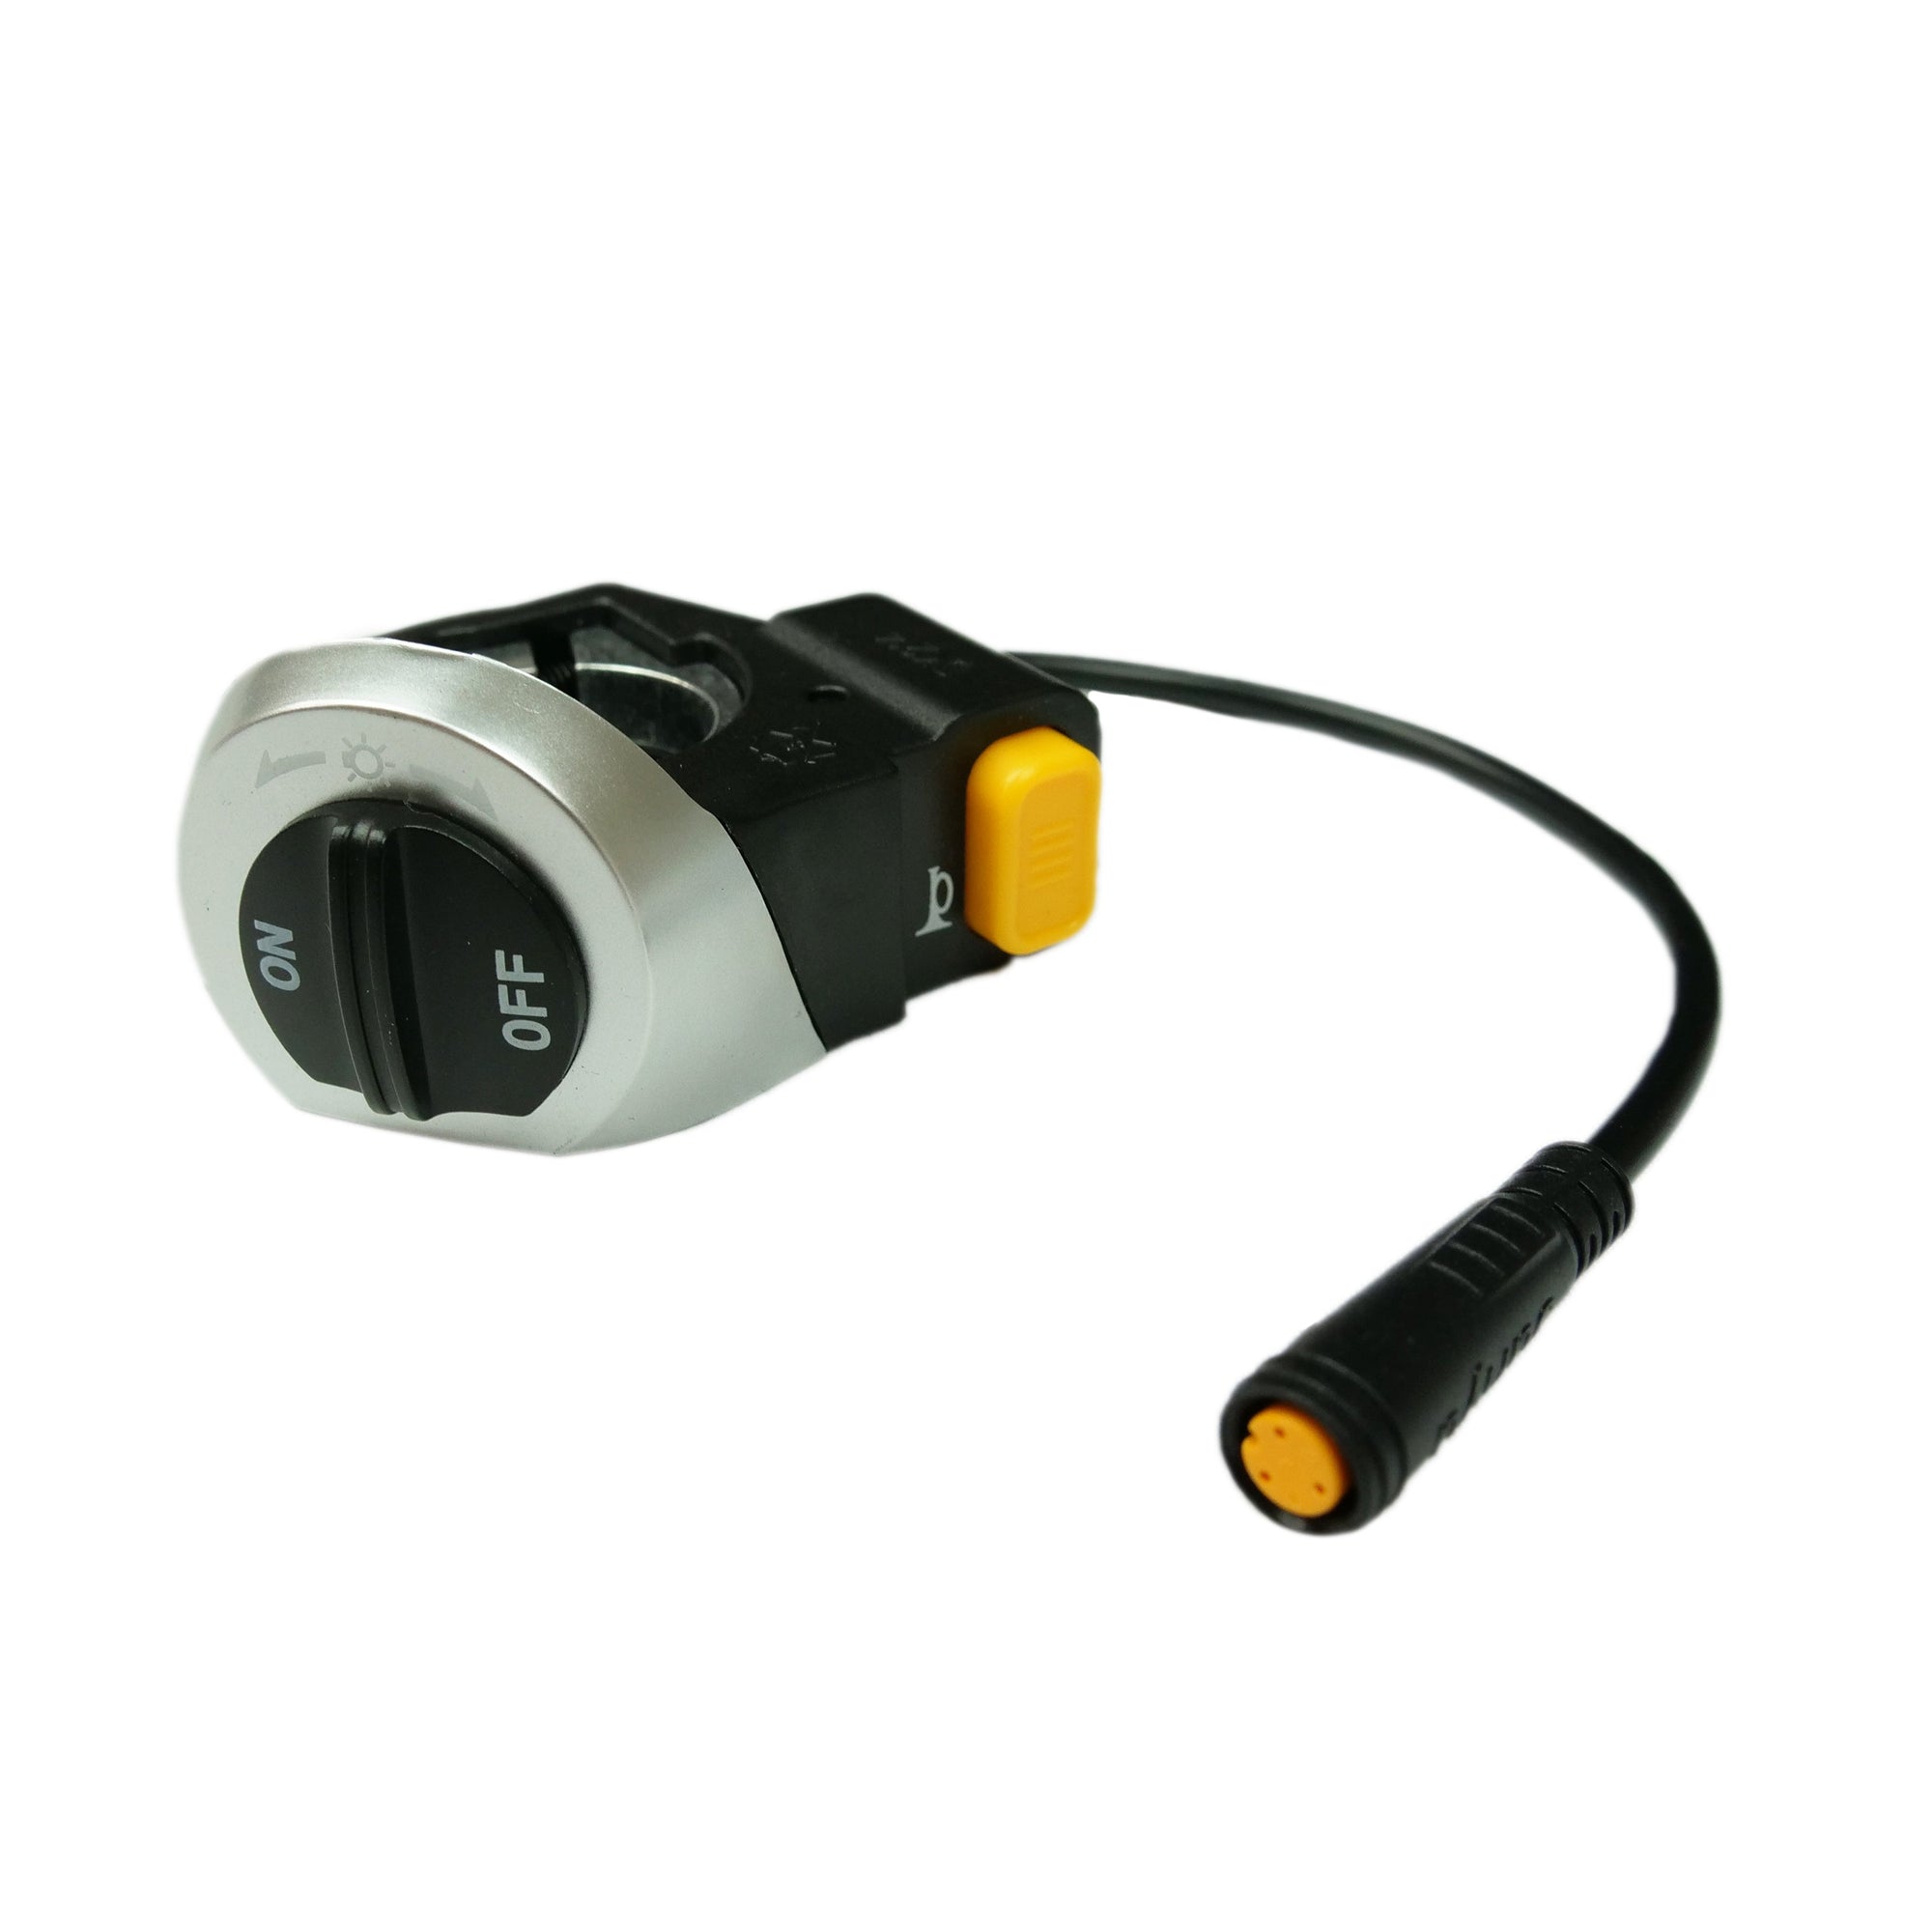 Horn and Light Switch for the EMOVE Touring